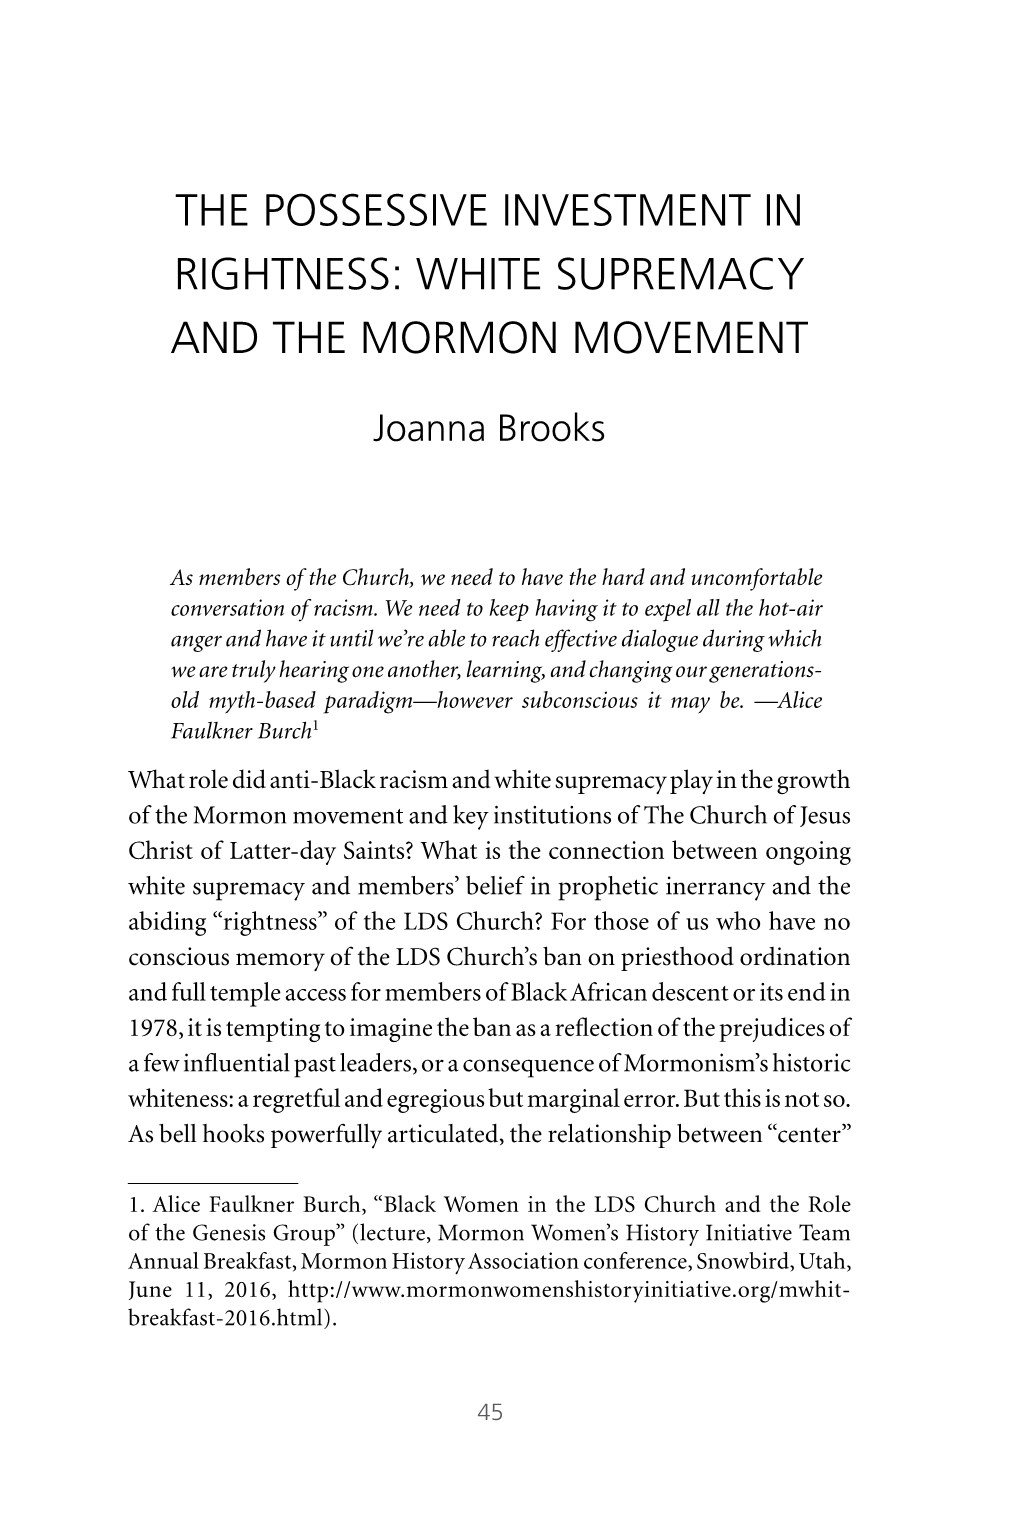 The Possessive Investment in Rightness: White Supremacy and the Mormon Movement